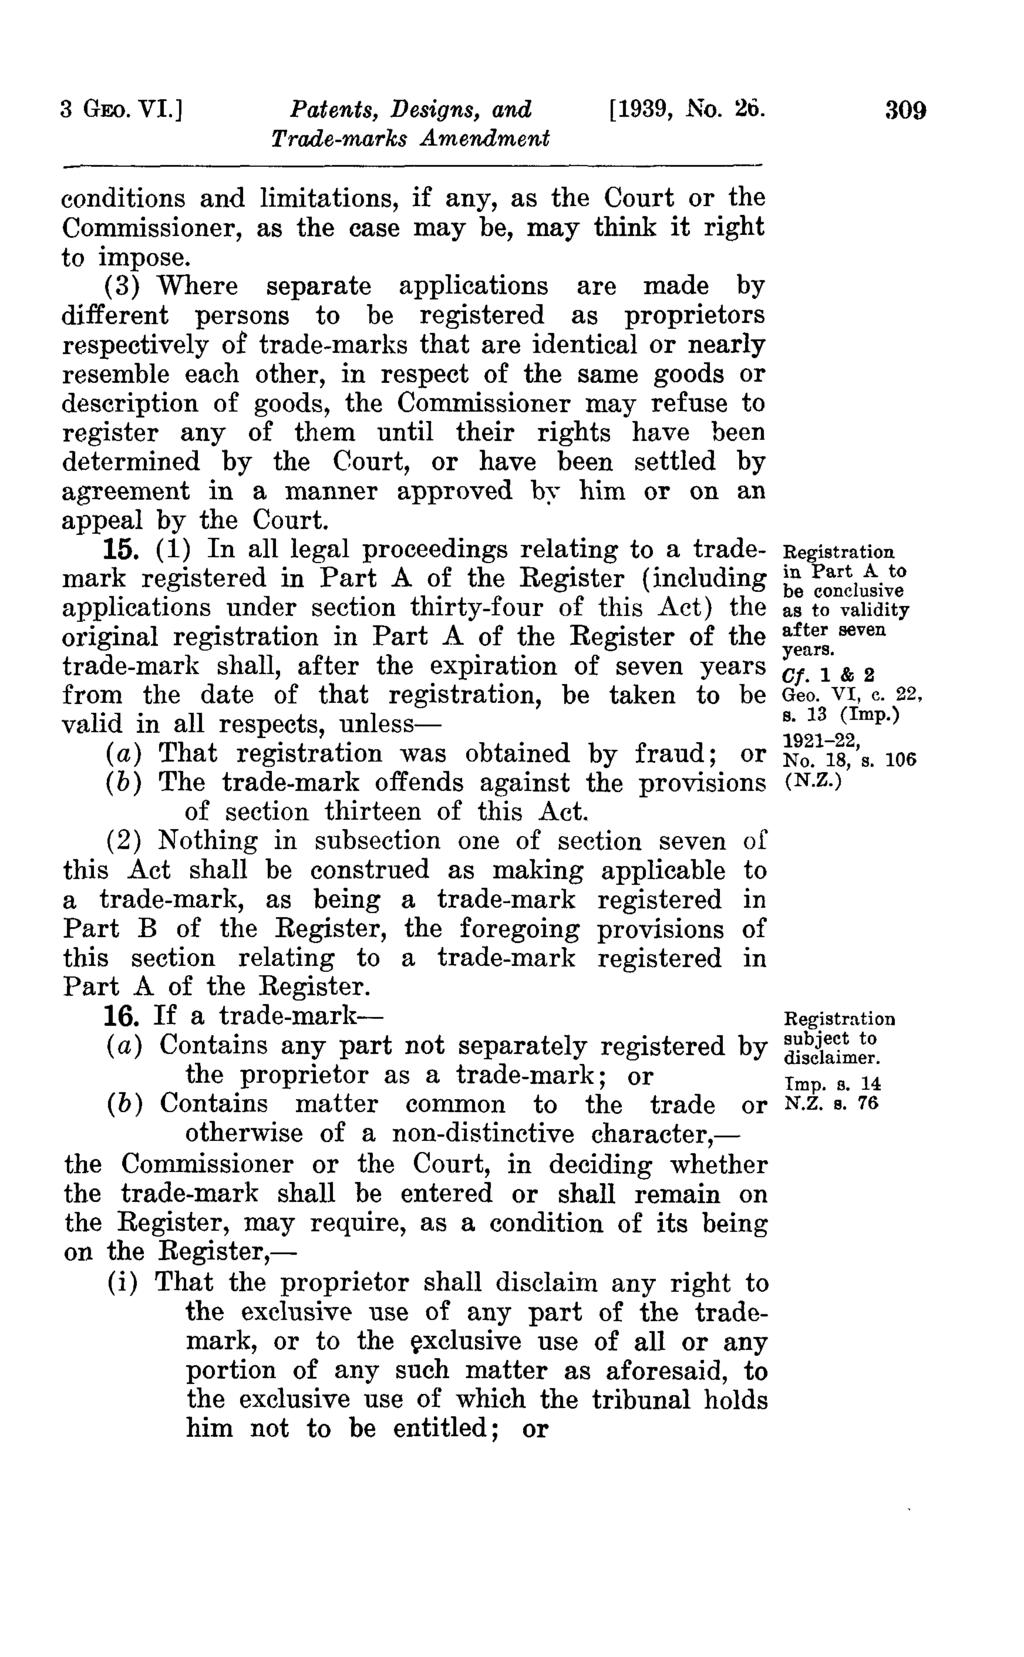 3 GEO. VI.] Patents, Designs, and [1939, No. 26. 309 conditions and limitations, if any, as the Court or the Commissioner, as the case may be, may think it right to impose.